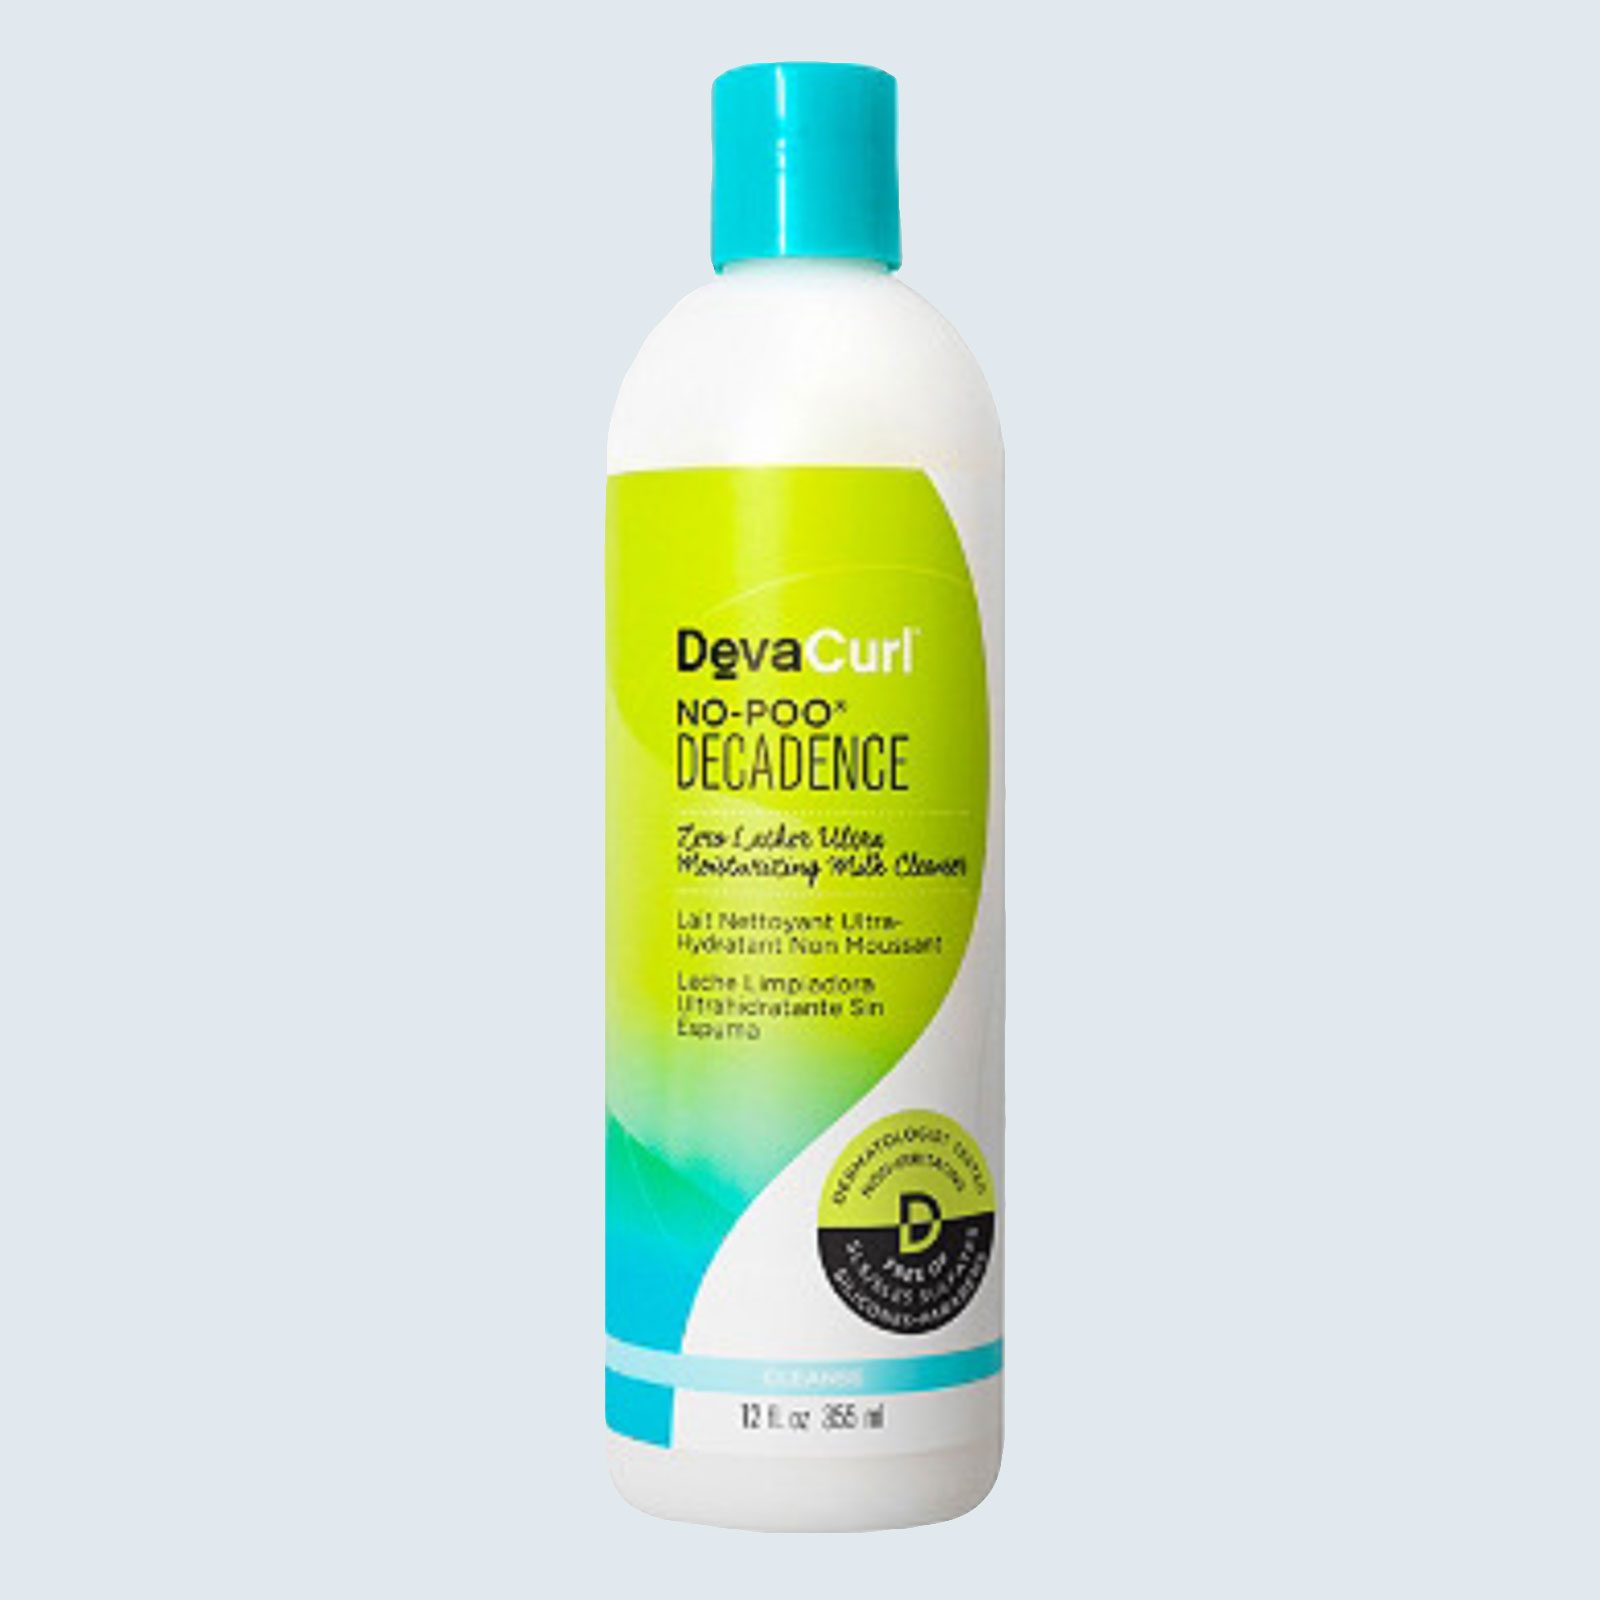 Best shampoo for extremely dry hair: DevaCurl No-Poo Decadence Zero Lather Ultra Moisturizing Milk Cleanser